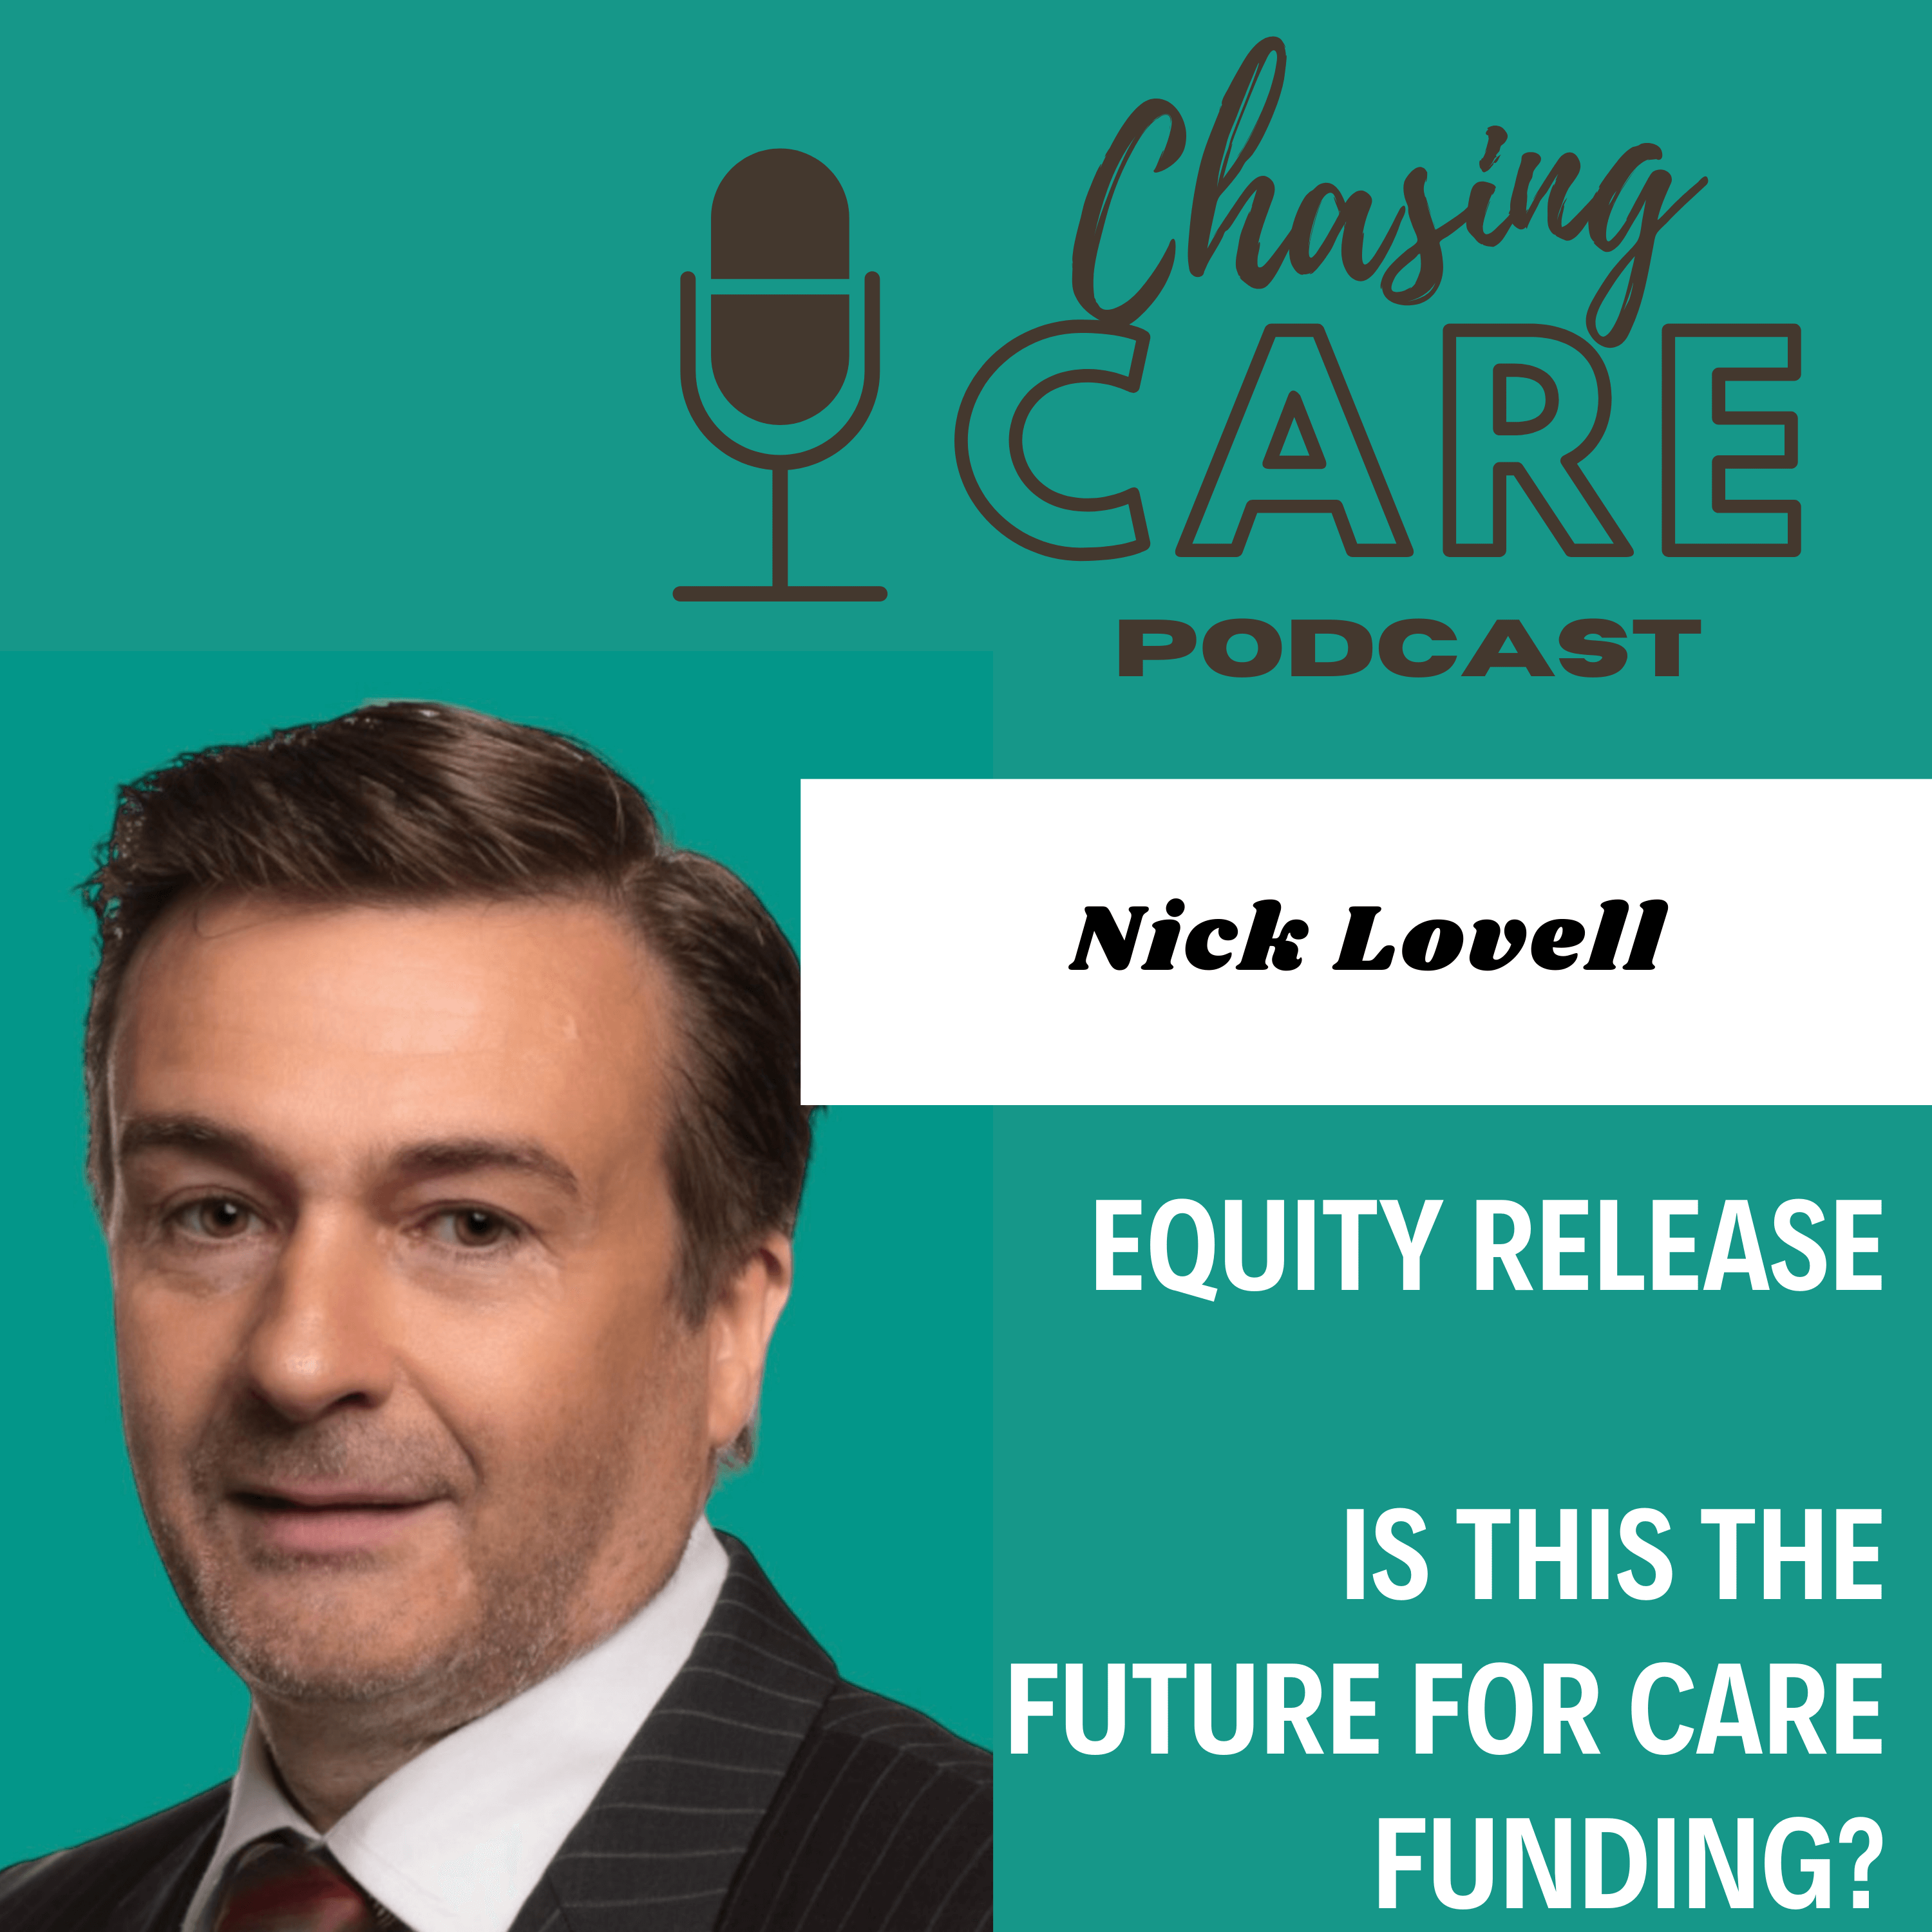 Is Equity Release right for me or just a quick cash fix? Nick Lovell of Concept Financial Services untangles the confusion.